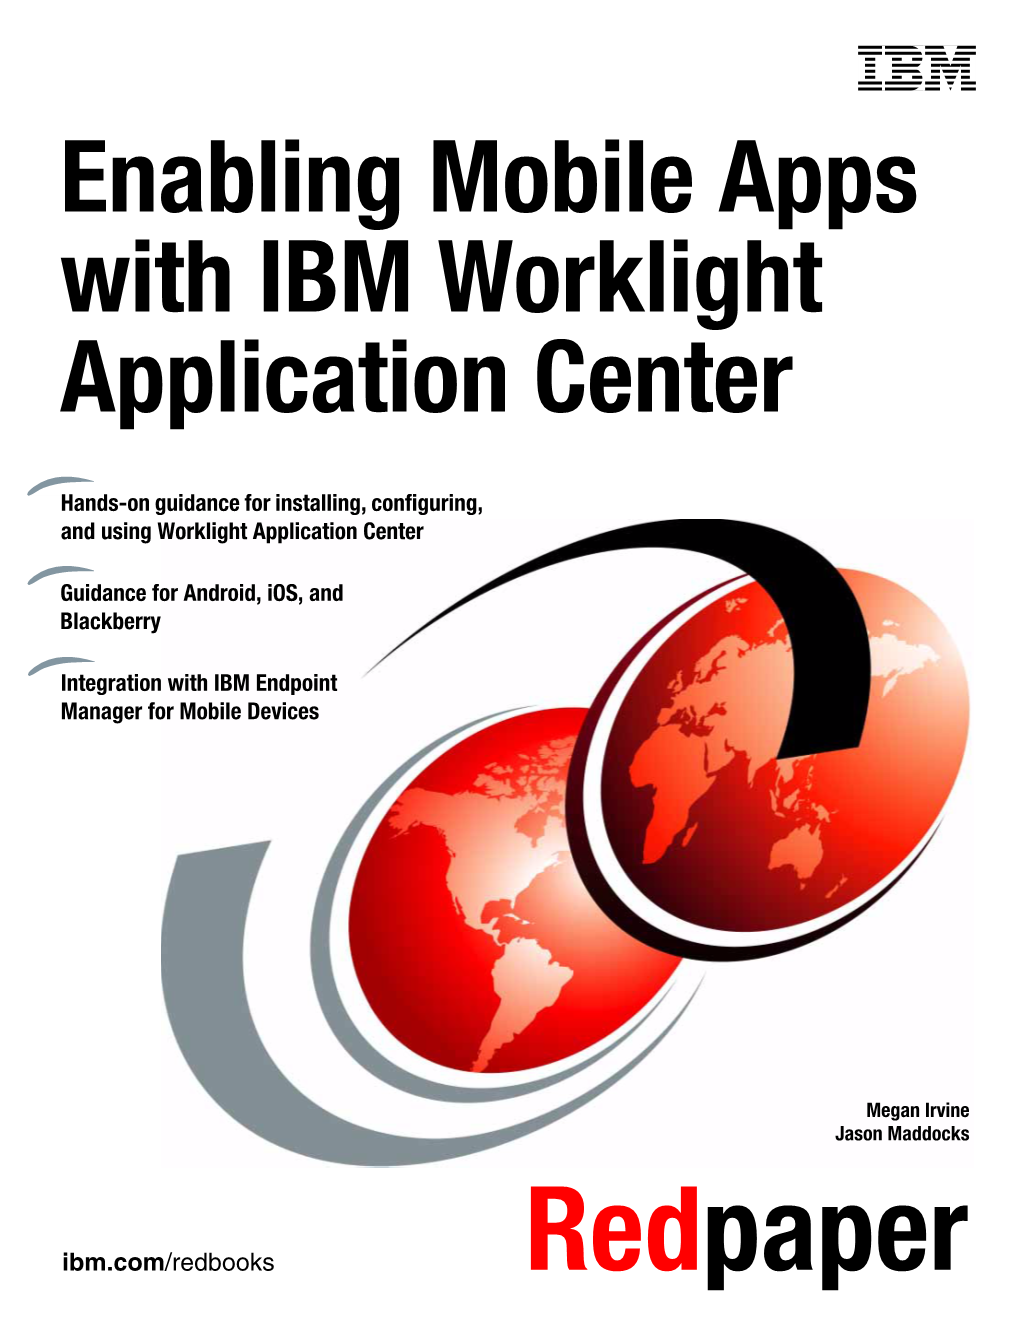 Enabling Mobile Apps with IBM Worklight Application Center